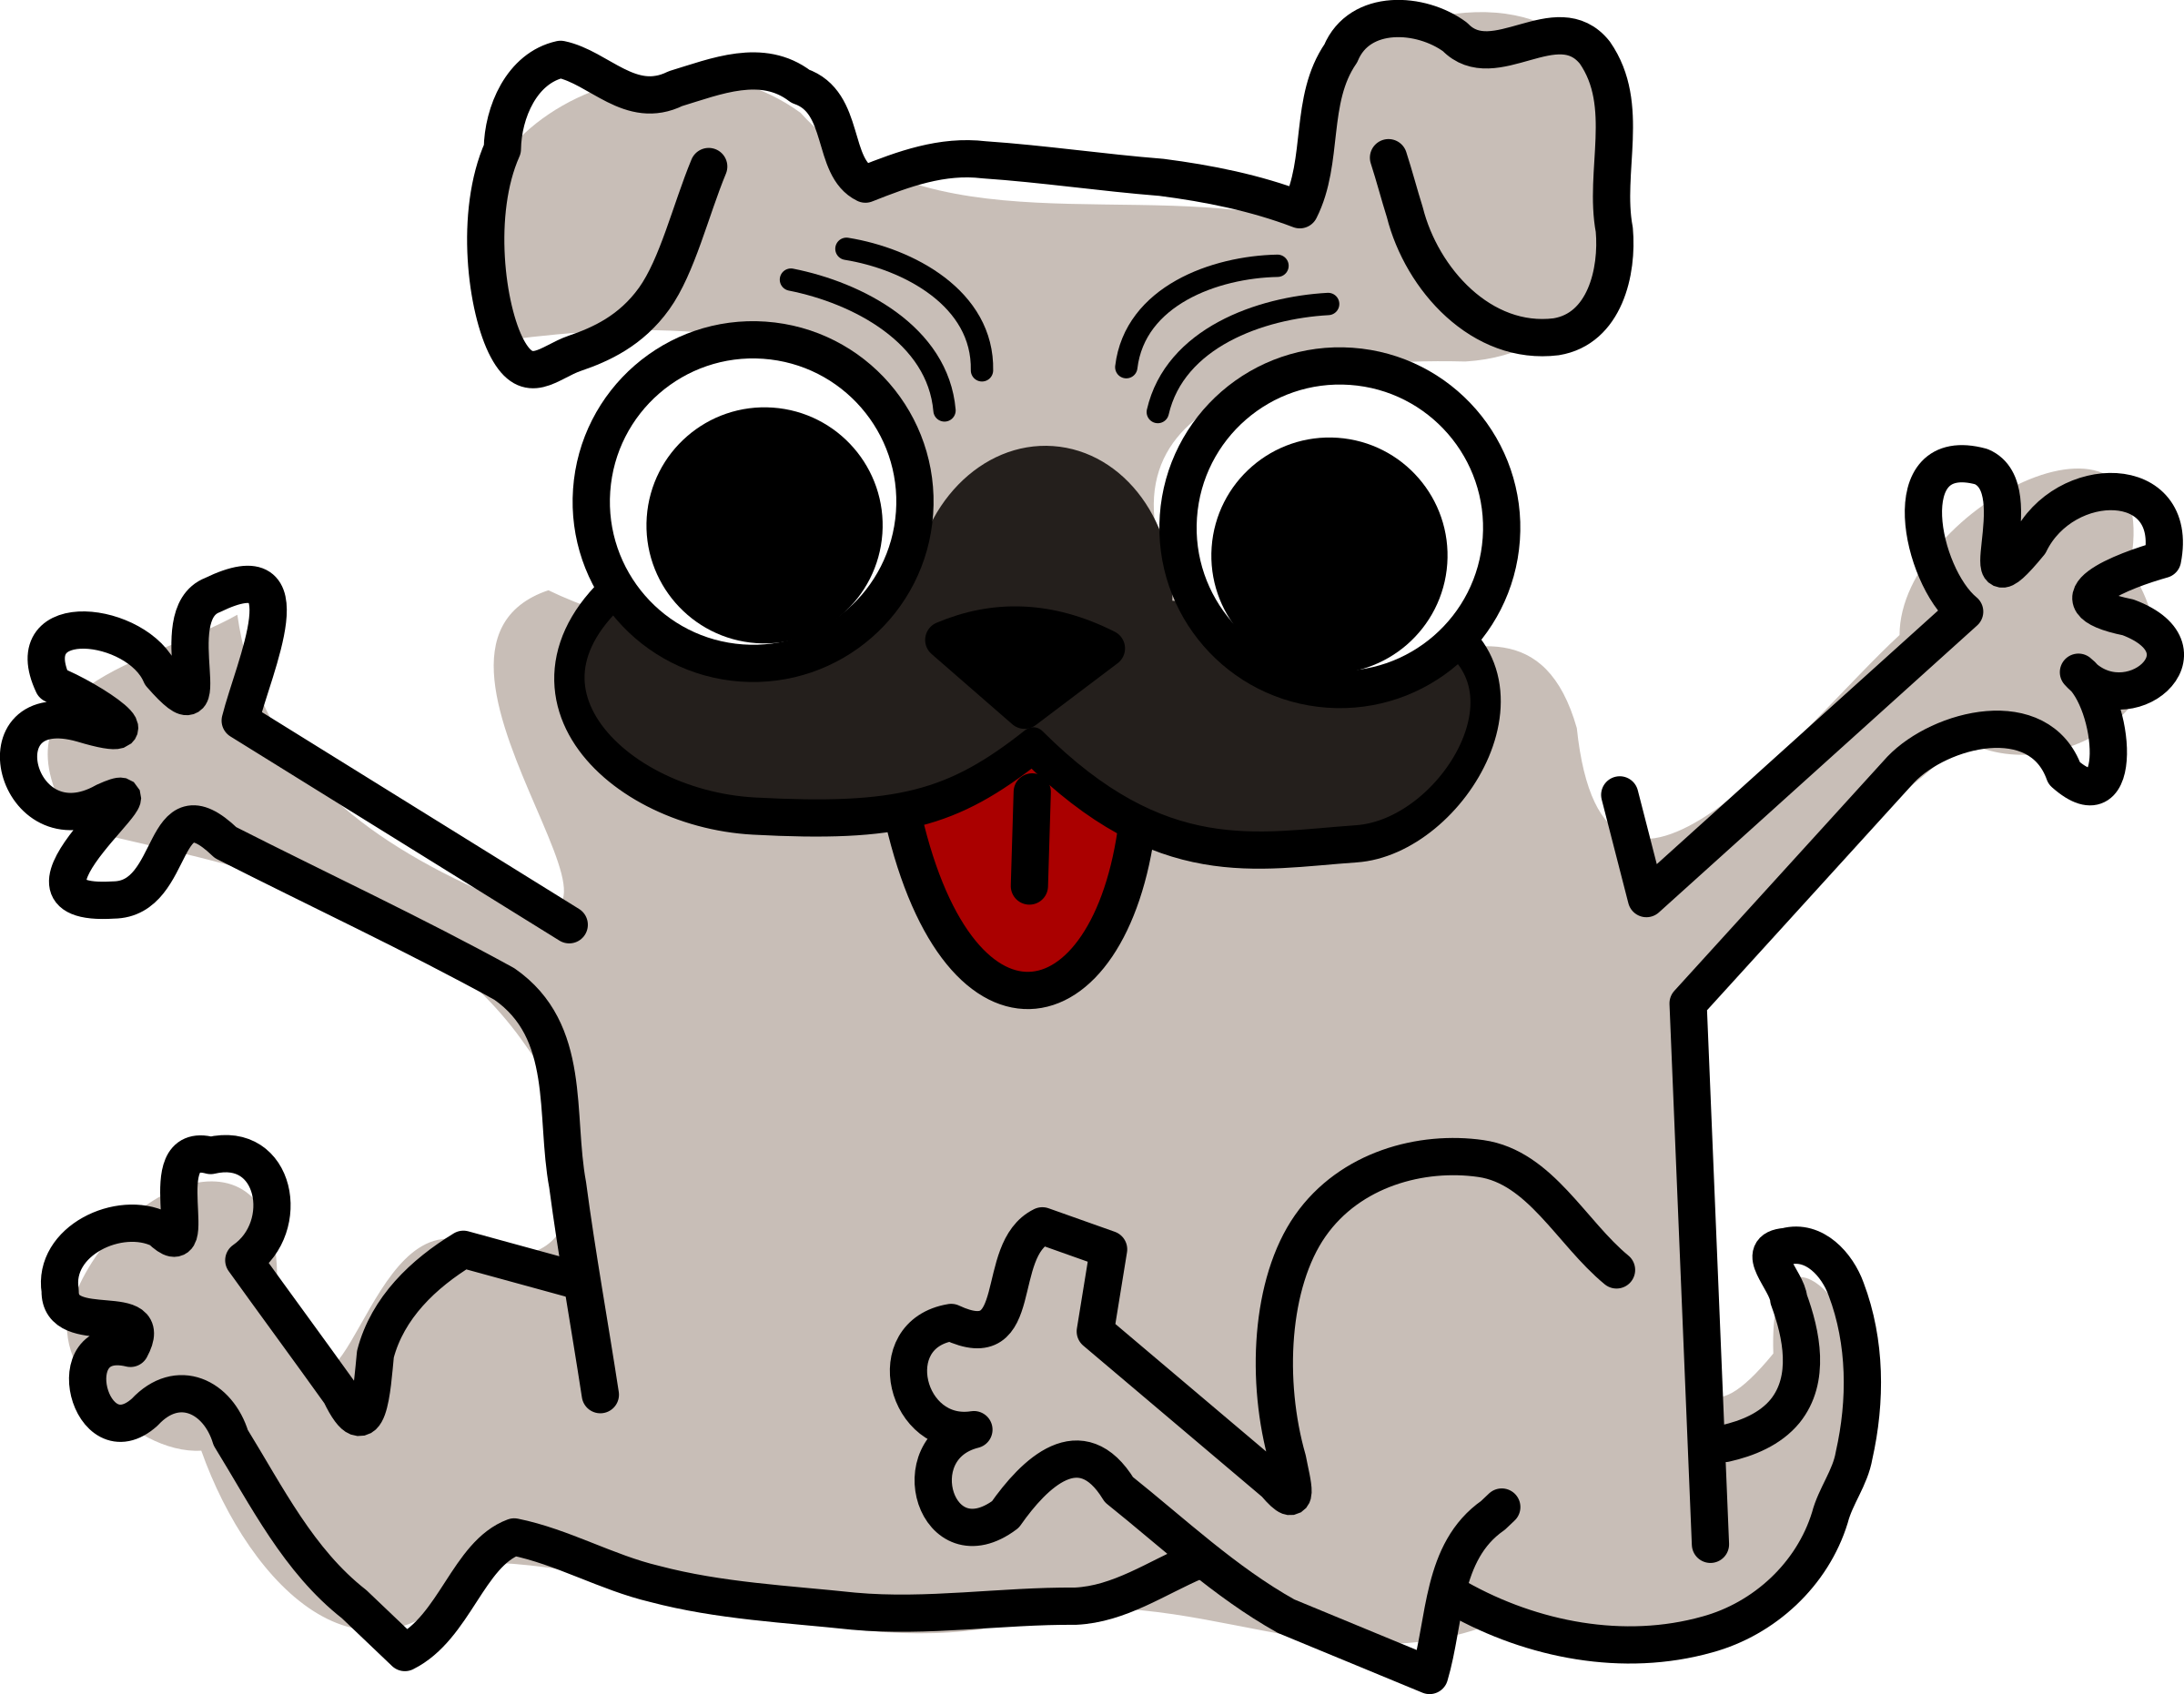 Big image png. Ghost clipart dog